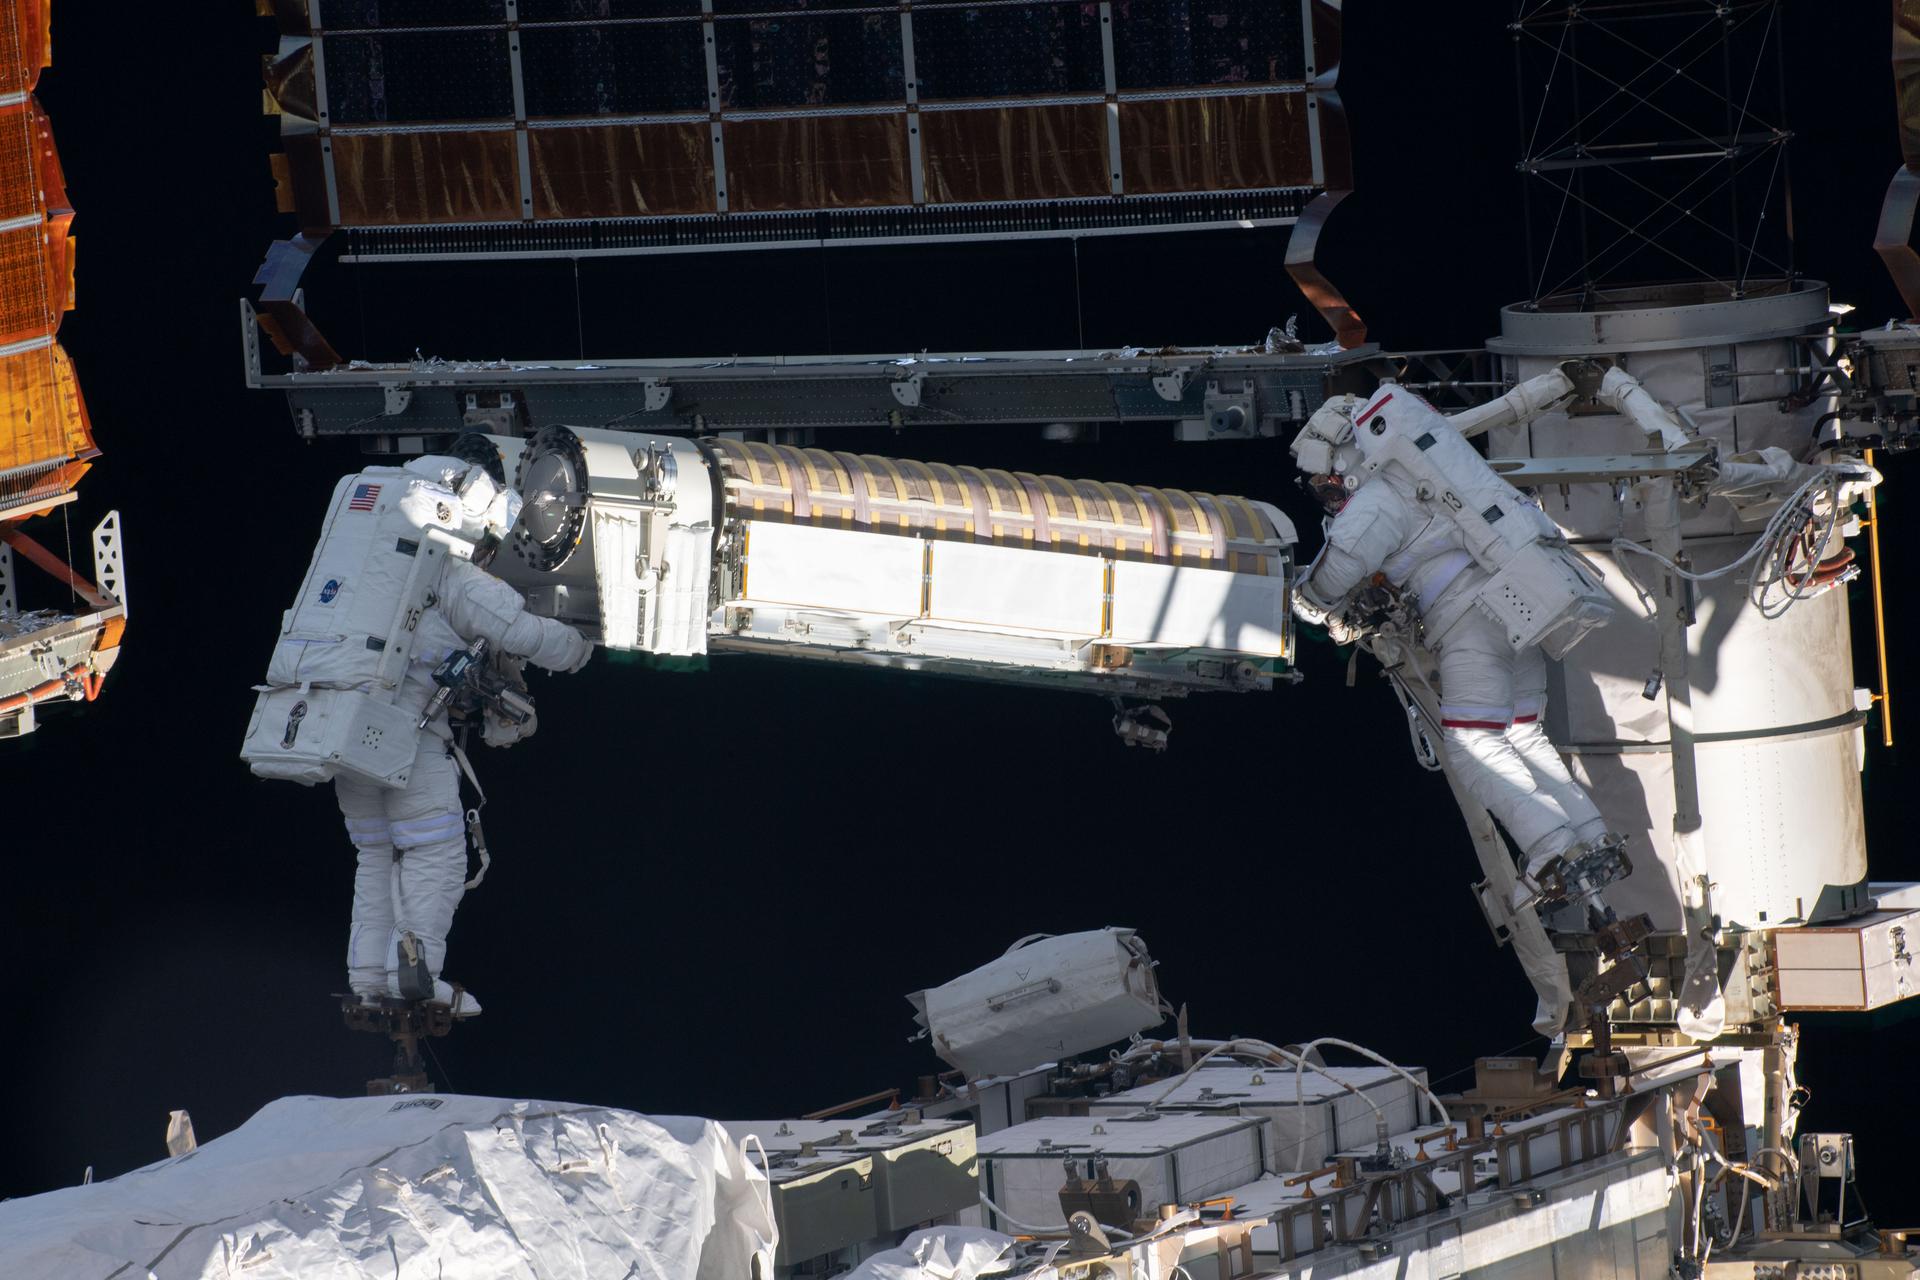 NASA astronaut Shane Kimbrough (left) and ESA astronaut Thomas Pesquet (right) photographed on June 16, 2021, while working to install new roll out solar arrays on the International Space Station's P-6 truss structure.